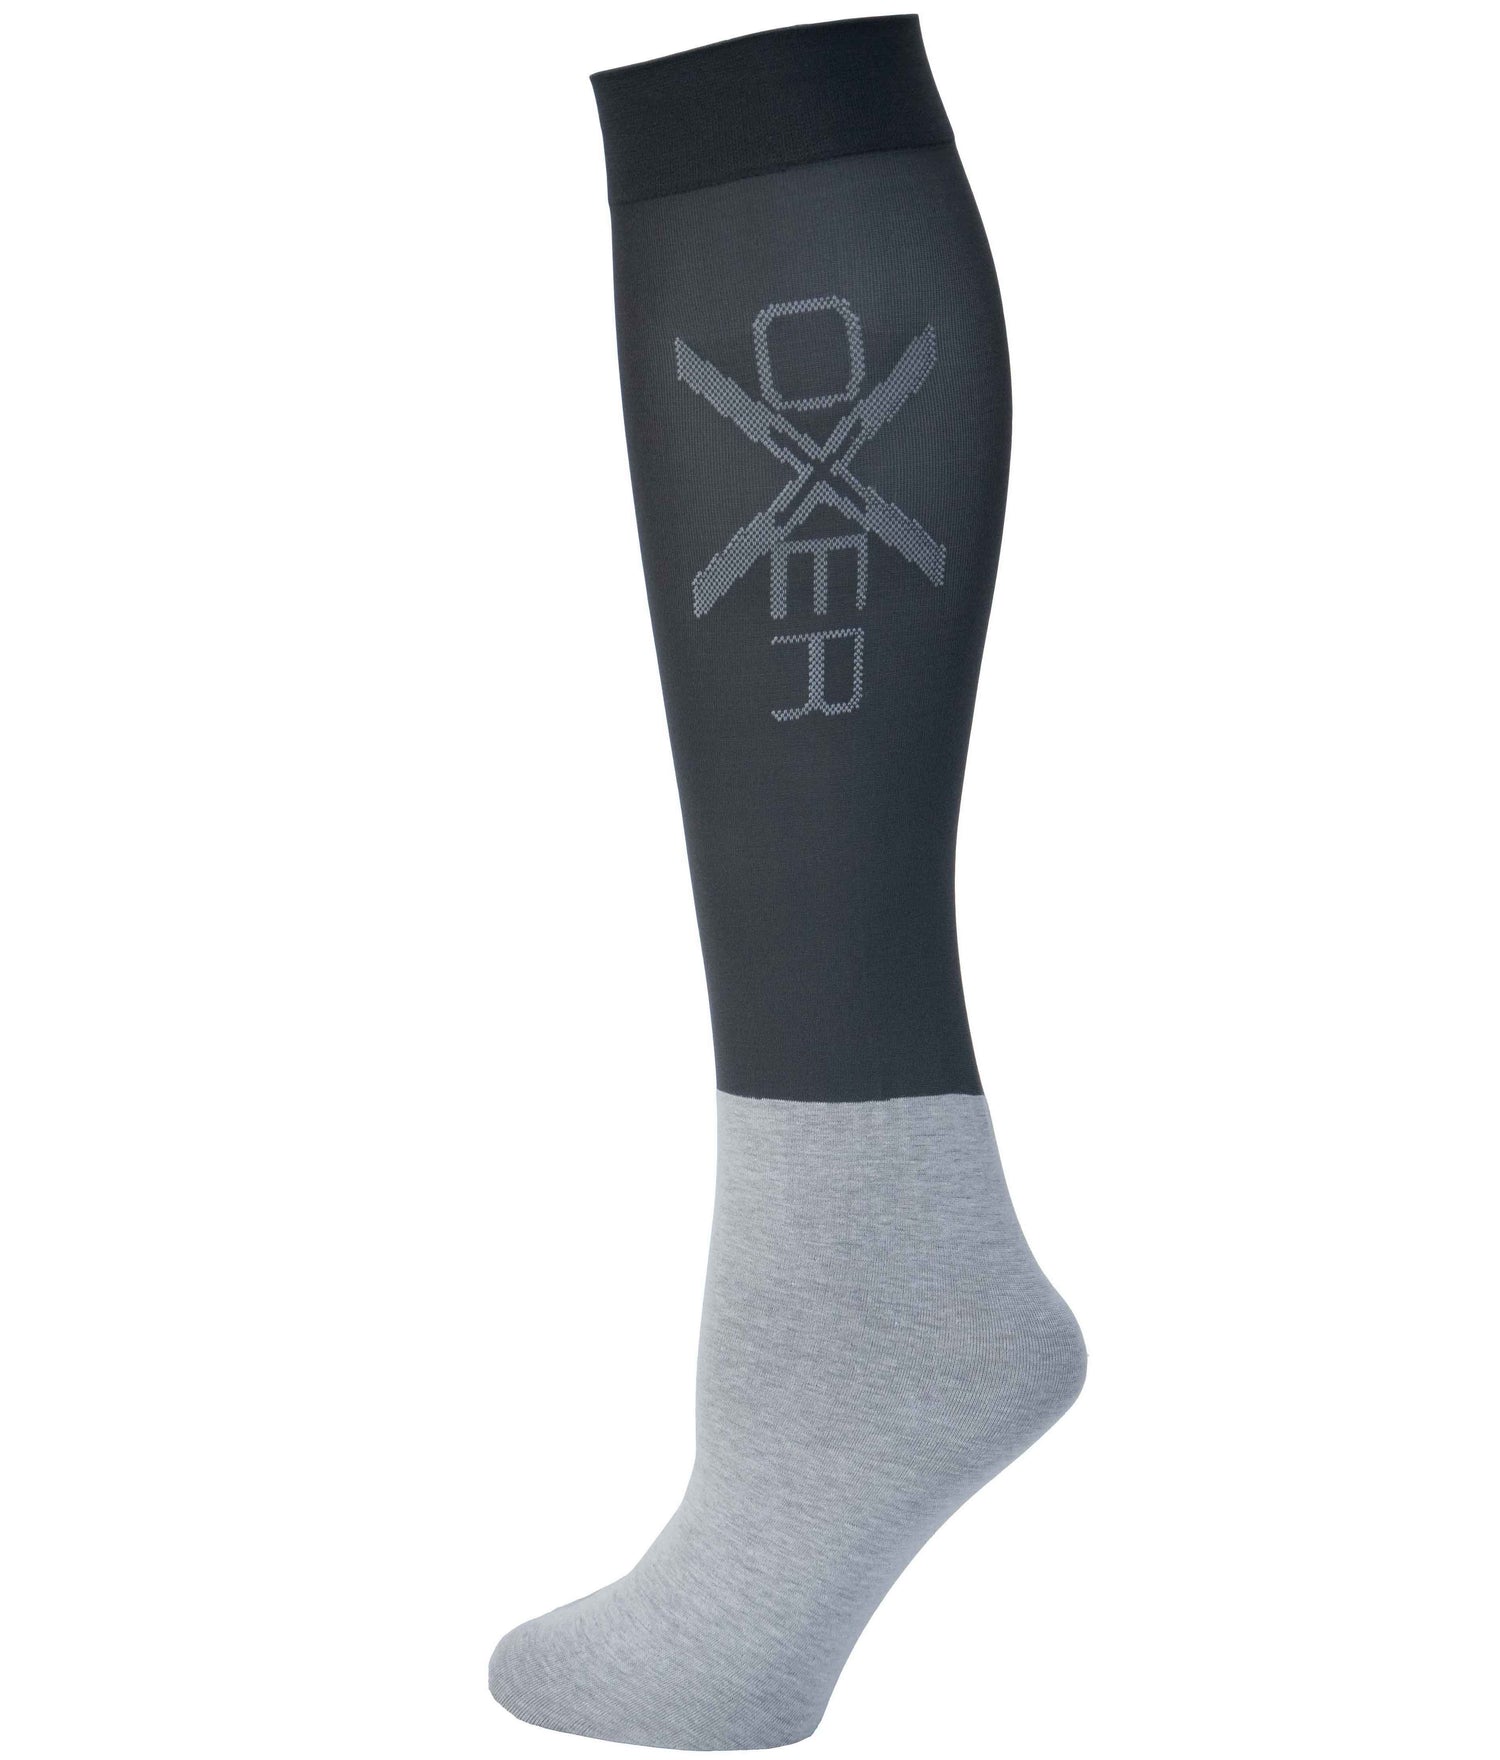 OXER riding socks have developed a range of sock by riders for riders.  They believe their socks enhances your performances so you can reach the highest potential. Made and woven with the finest quality materials available, this offers you the best comfort possible whilst riding and on the yard. Oxer strives to manufacture and offer the most durable and comfortable horse riding socks available.